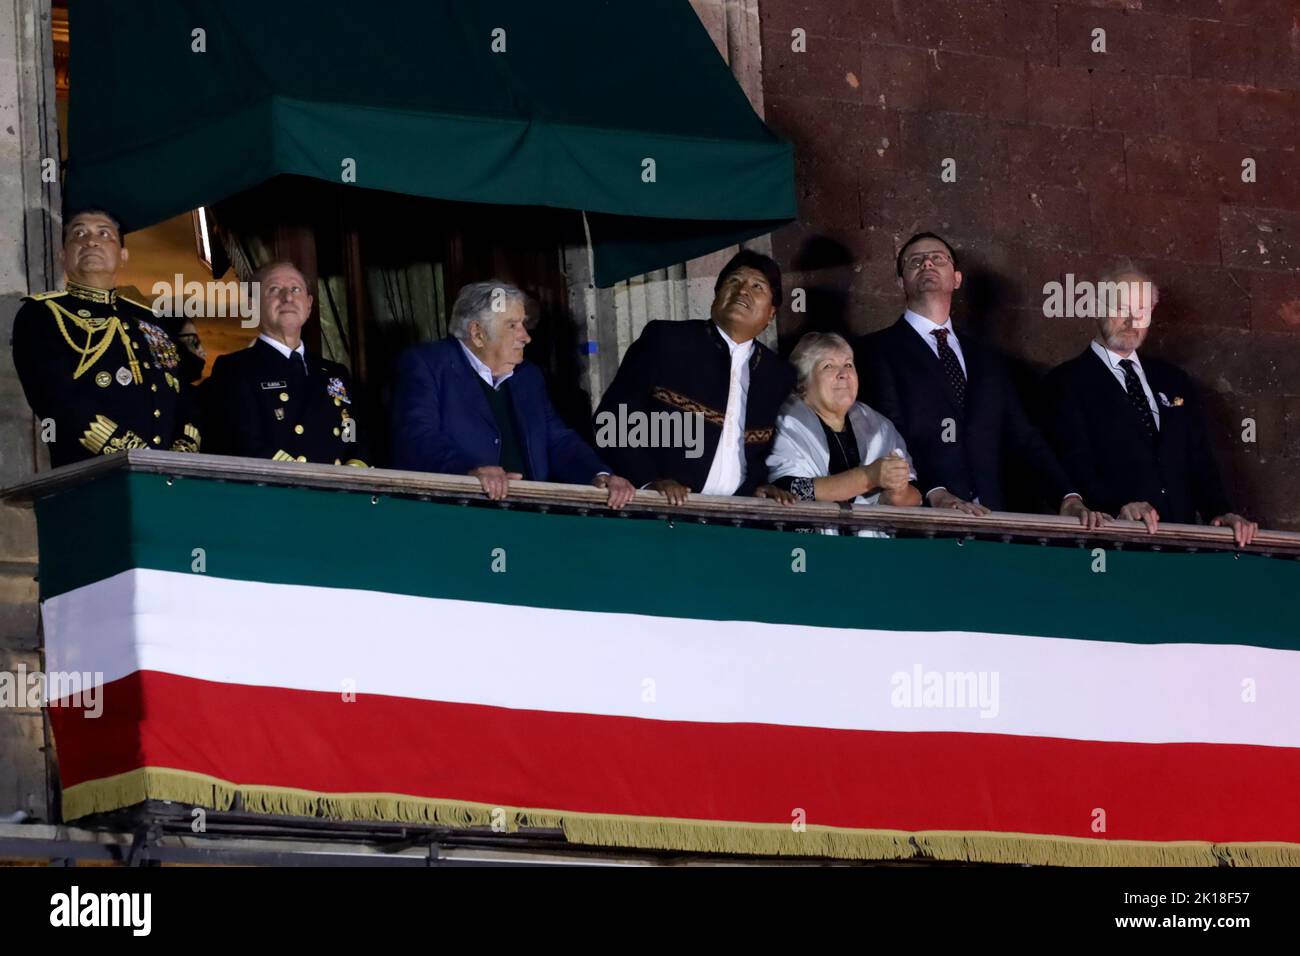 September 15, 2022, Mexico City, Mexico: The Secretaries of National Defense, Luis Crescencio Sandoval; of Navy, Rafael Ojeda; the former president of Uruguay, José Mújica; the former president of Bolivia, Evo Morales; Aleida Guevara March, daughter of Ernesto 'Che' Guevara; Gabriel Shipton and John Shipton, brother and father of Julian Assange, during the ceremony on the 212th anniversary of the Mexico's Cry of Independence at the National Palace. on September 15, 2022 in Mexico City, Mexico. (Photo by Luis Barron/Eyepix Group/Sipa USA). Stock Photo